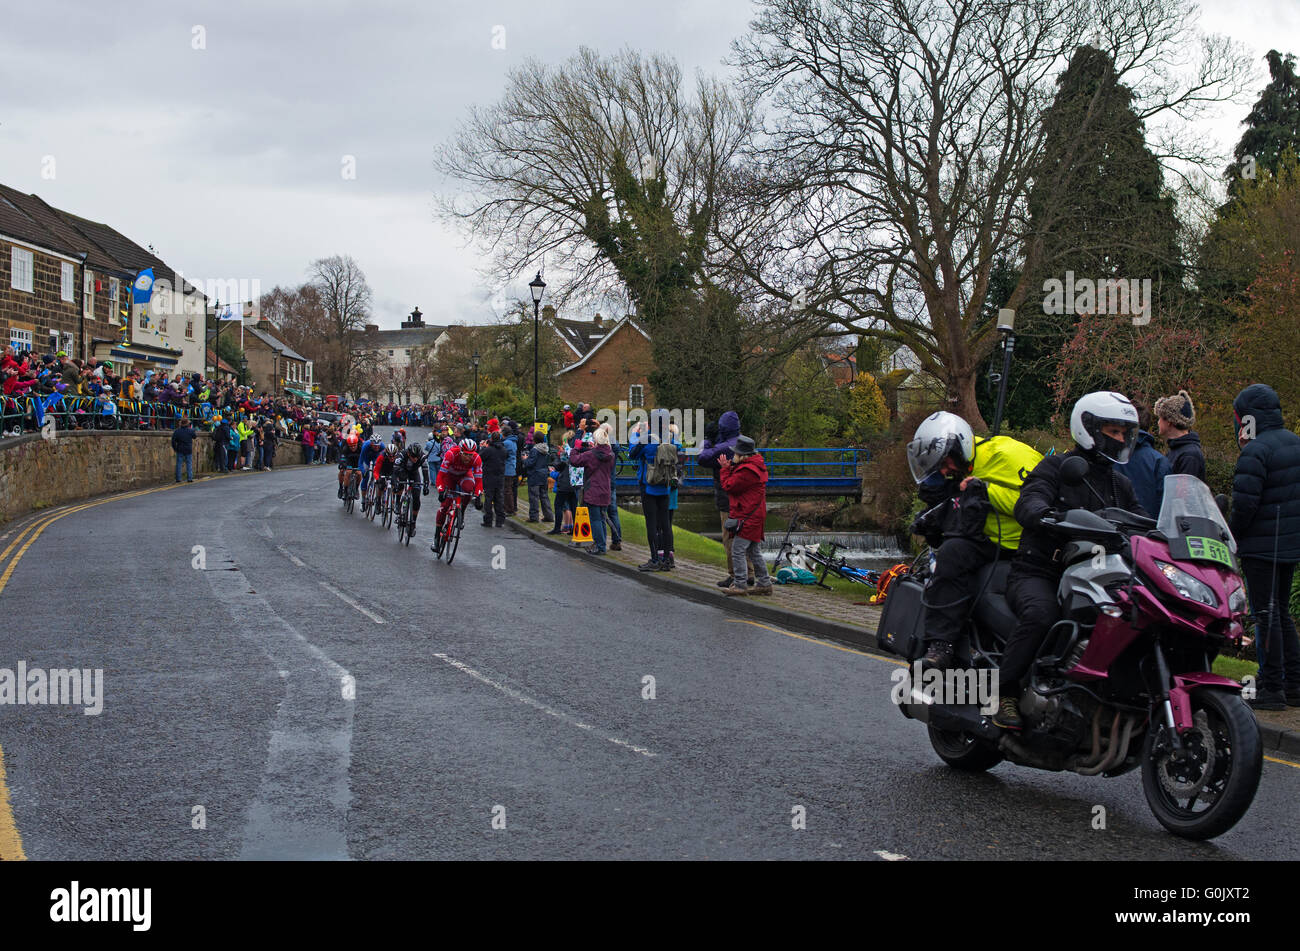 Great Ayton, North Yorkshire. 1 May 2016. In dull weather, crowds line the main street, as the leading cyclists in Stage 3 of the Tour de Yorkshire race through the village, preceded by the race motorcyclist. Stock Photo